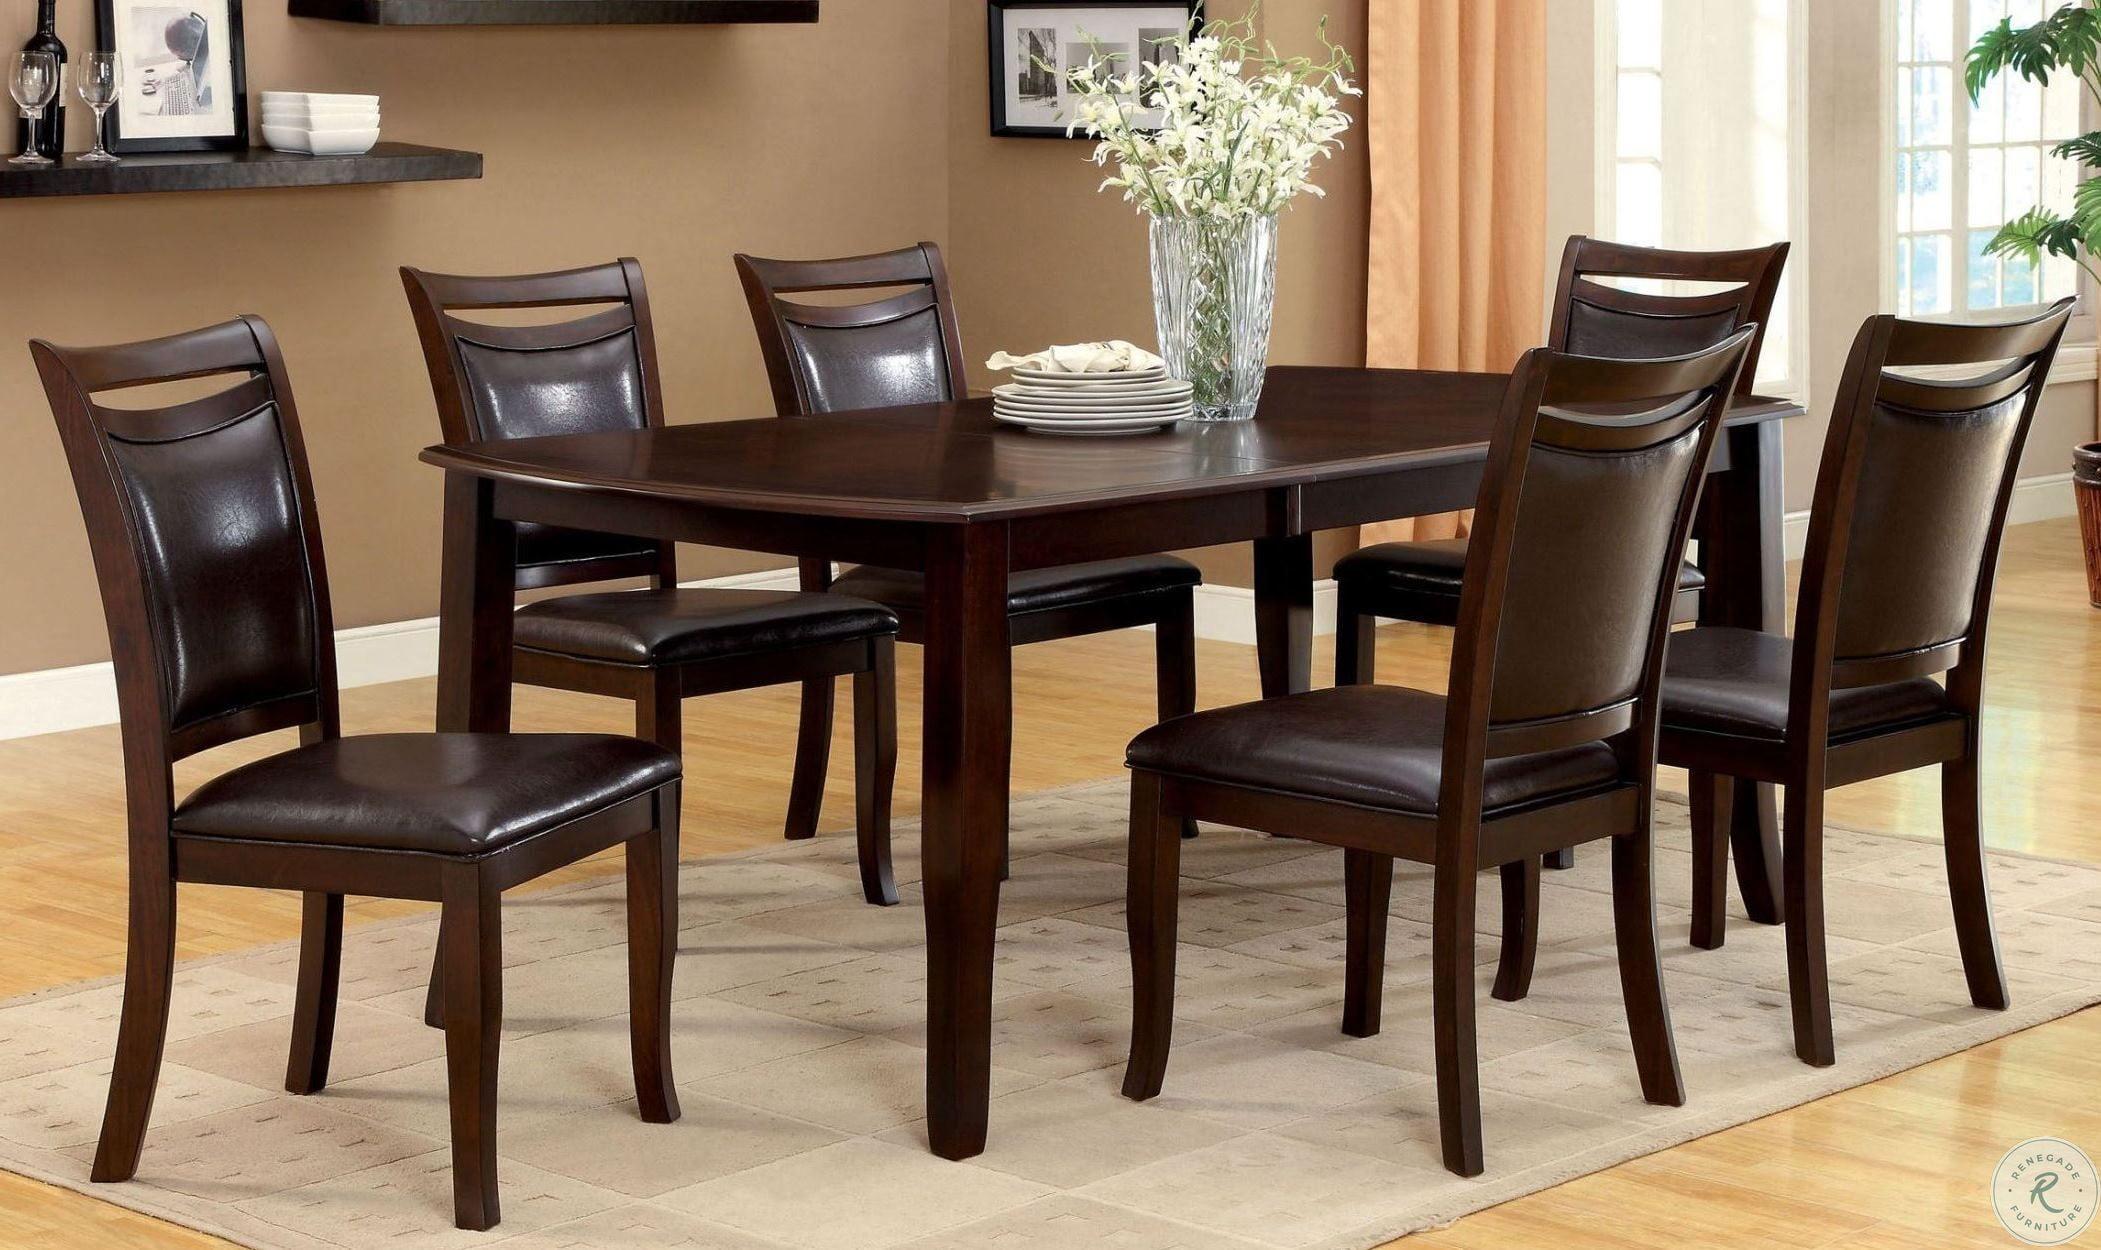 Transitional Dining Room Set CM3024T-5PC Woodside CM3024T-5PC in Dark Cherry Leatherette